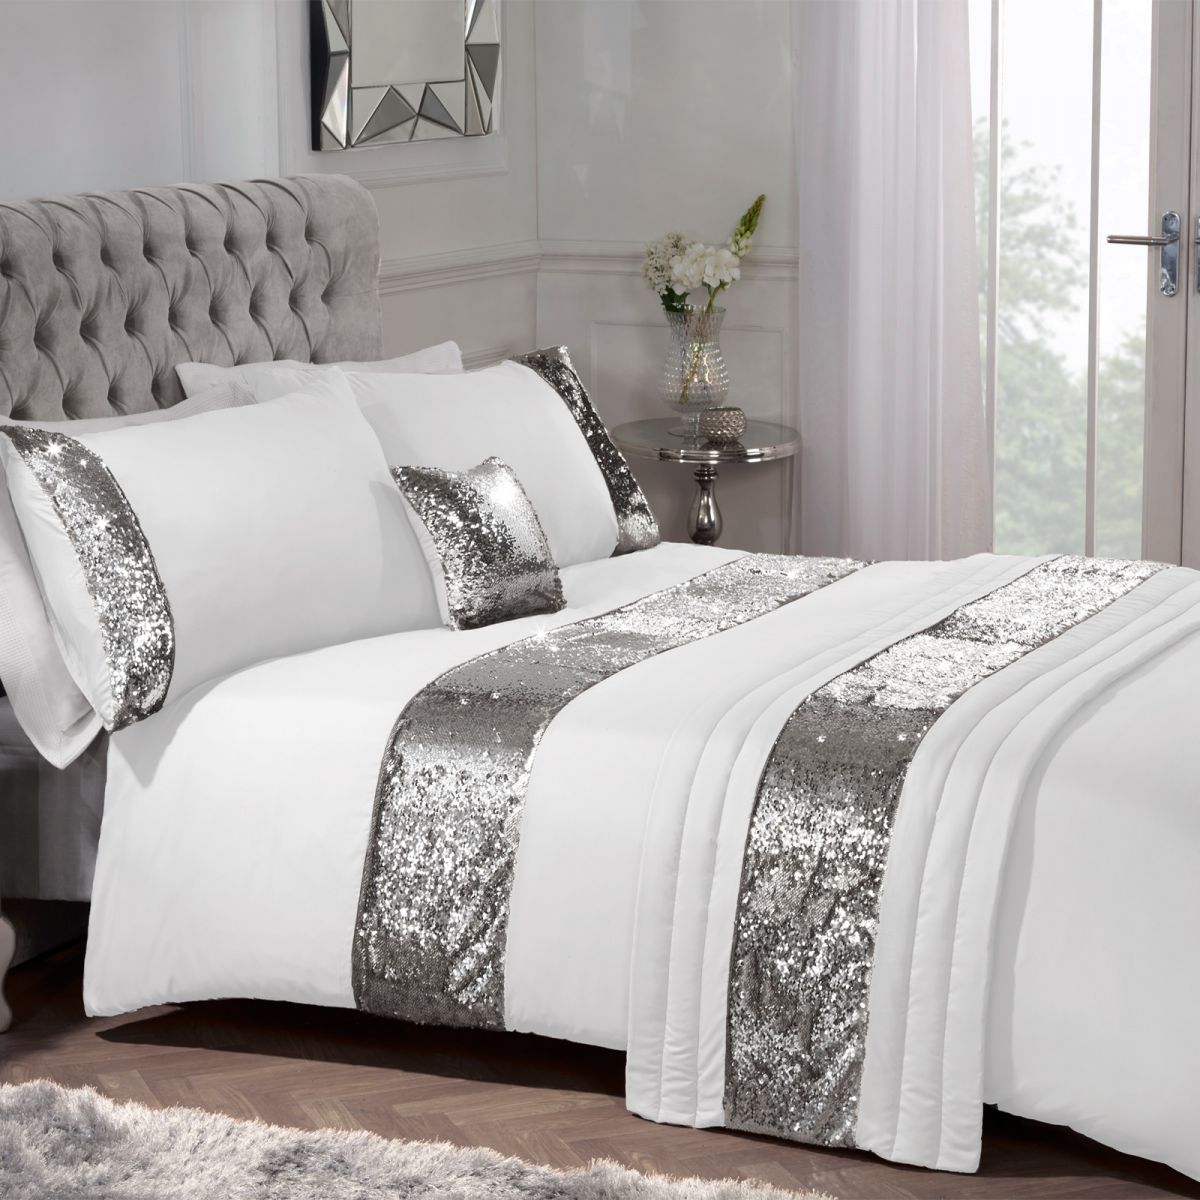 Sienna Mermaid Sequin Complete Bed in Bag - White/Silver